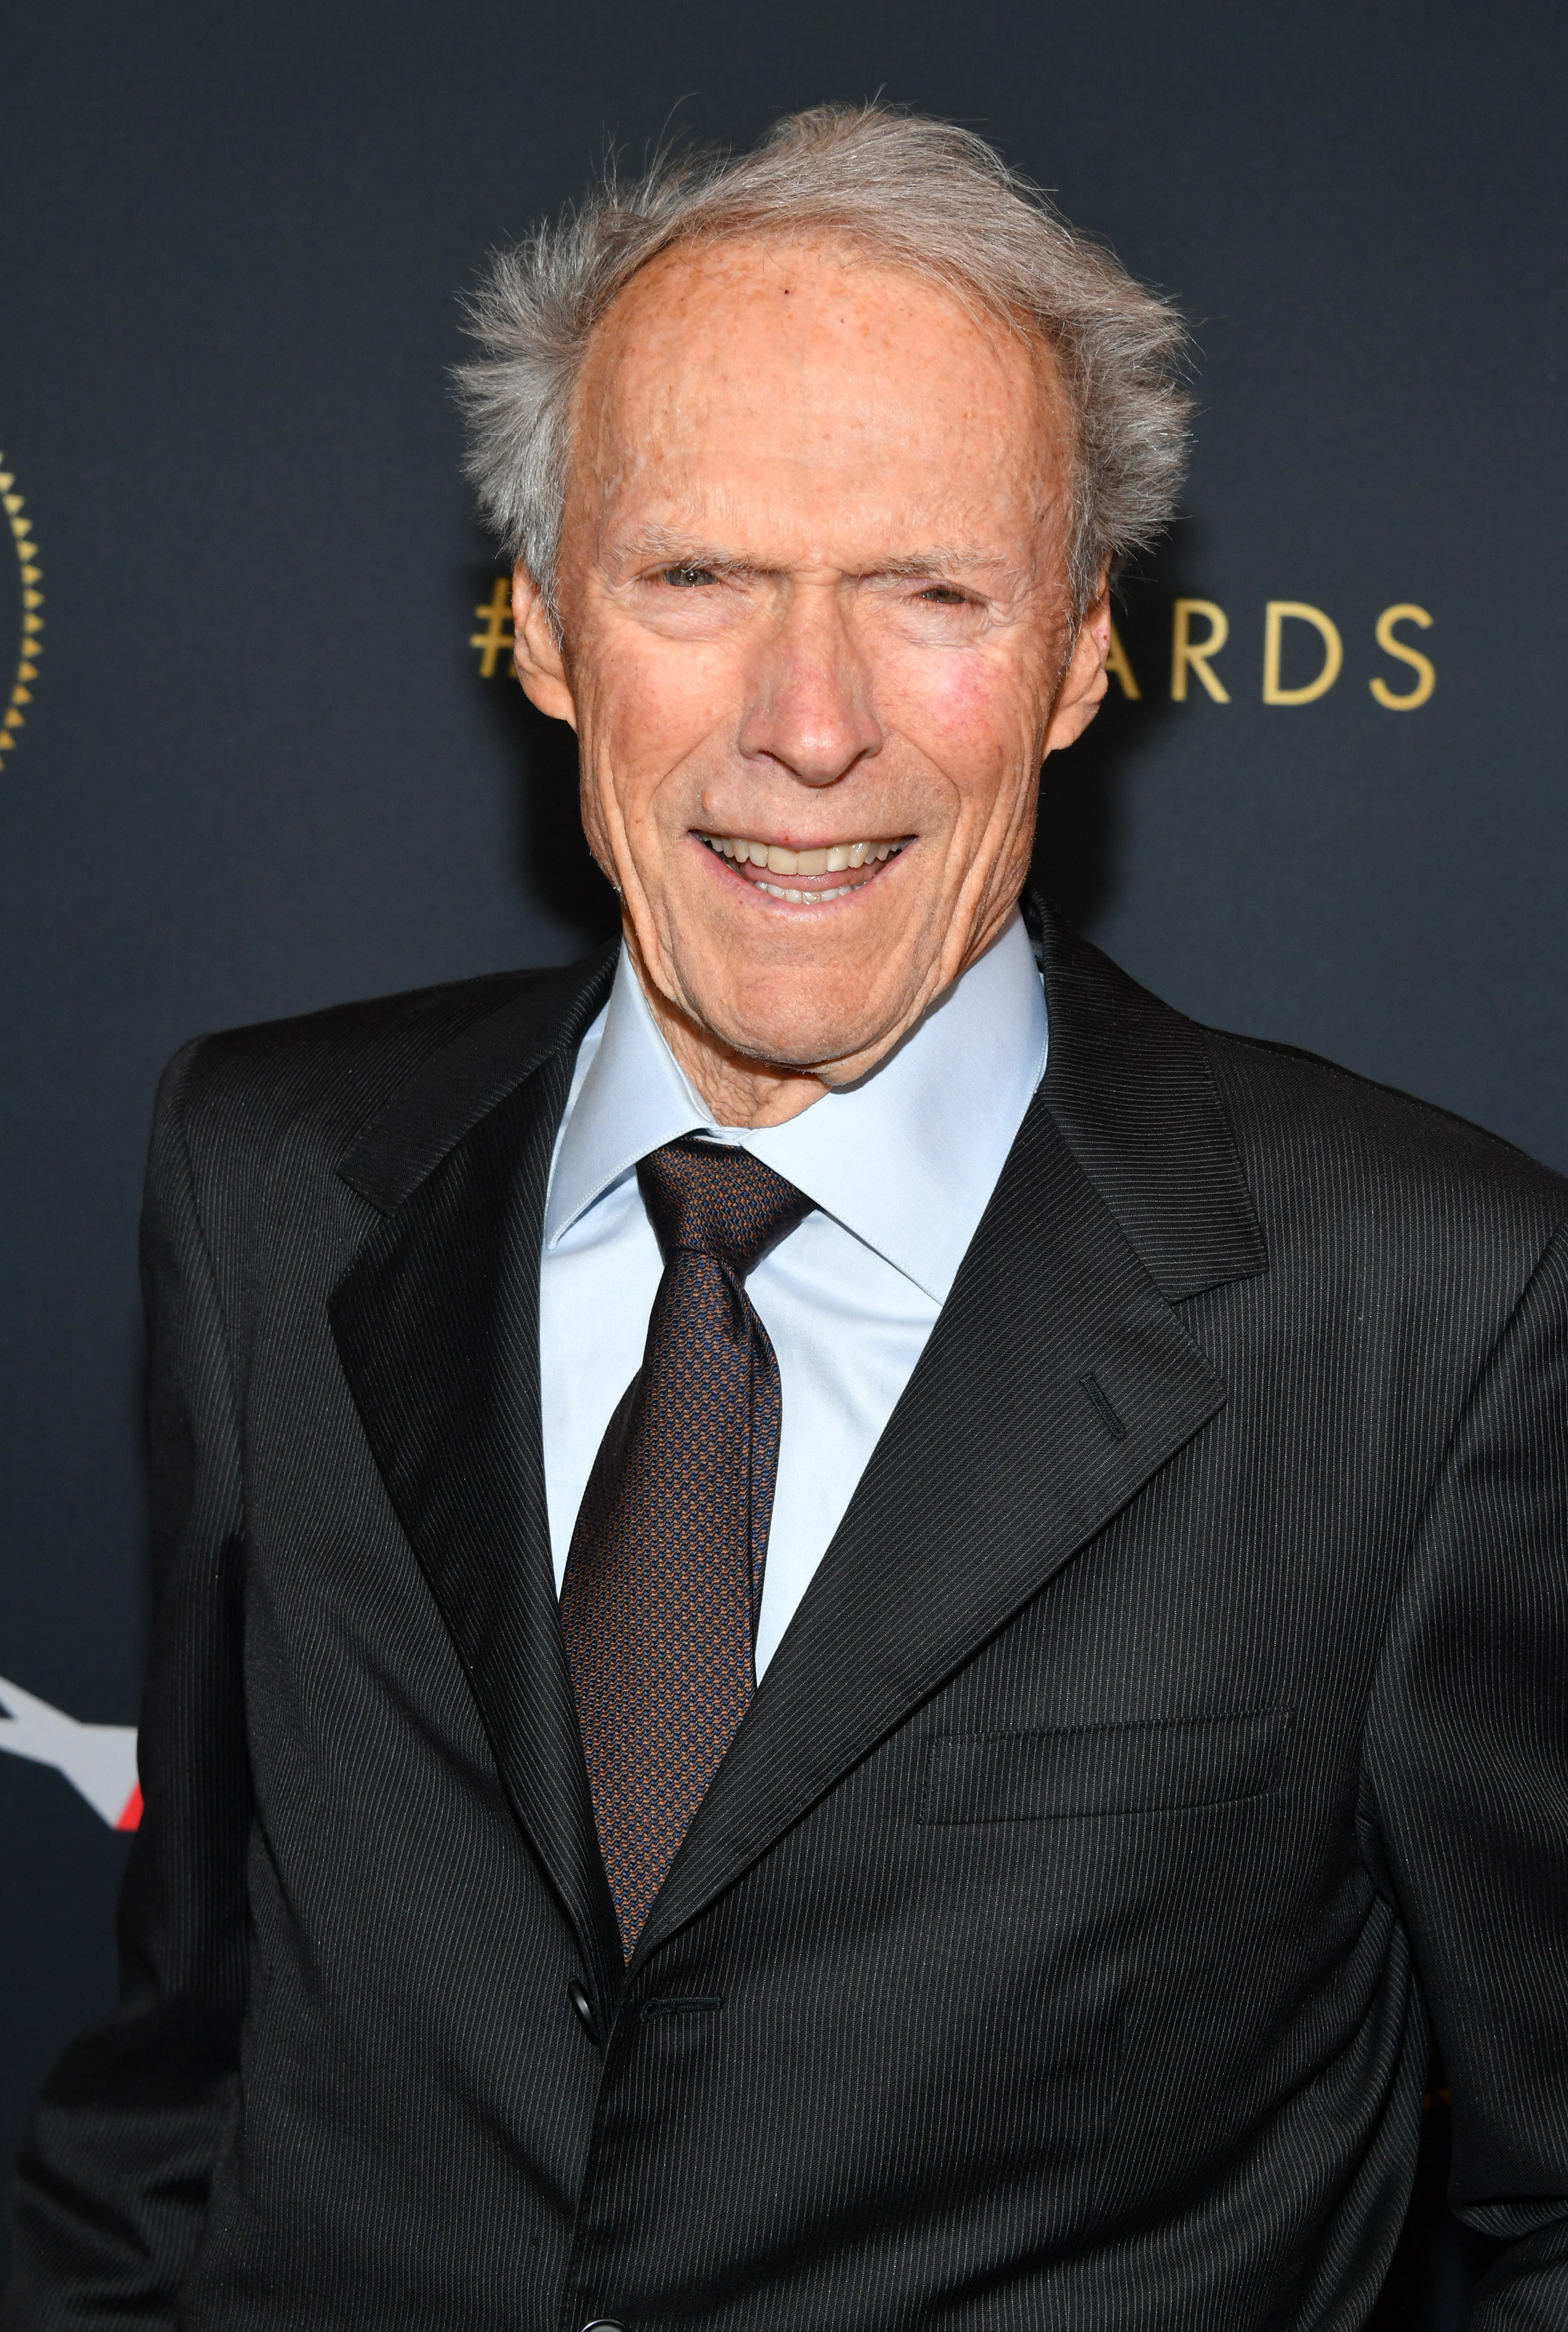 Clint Eastwood smiling in a suit